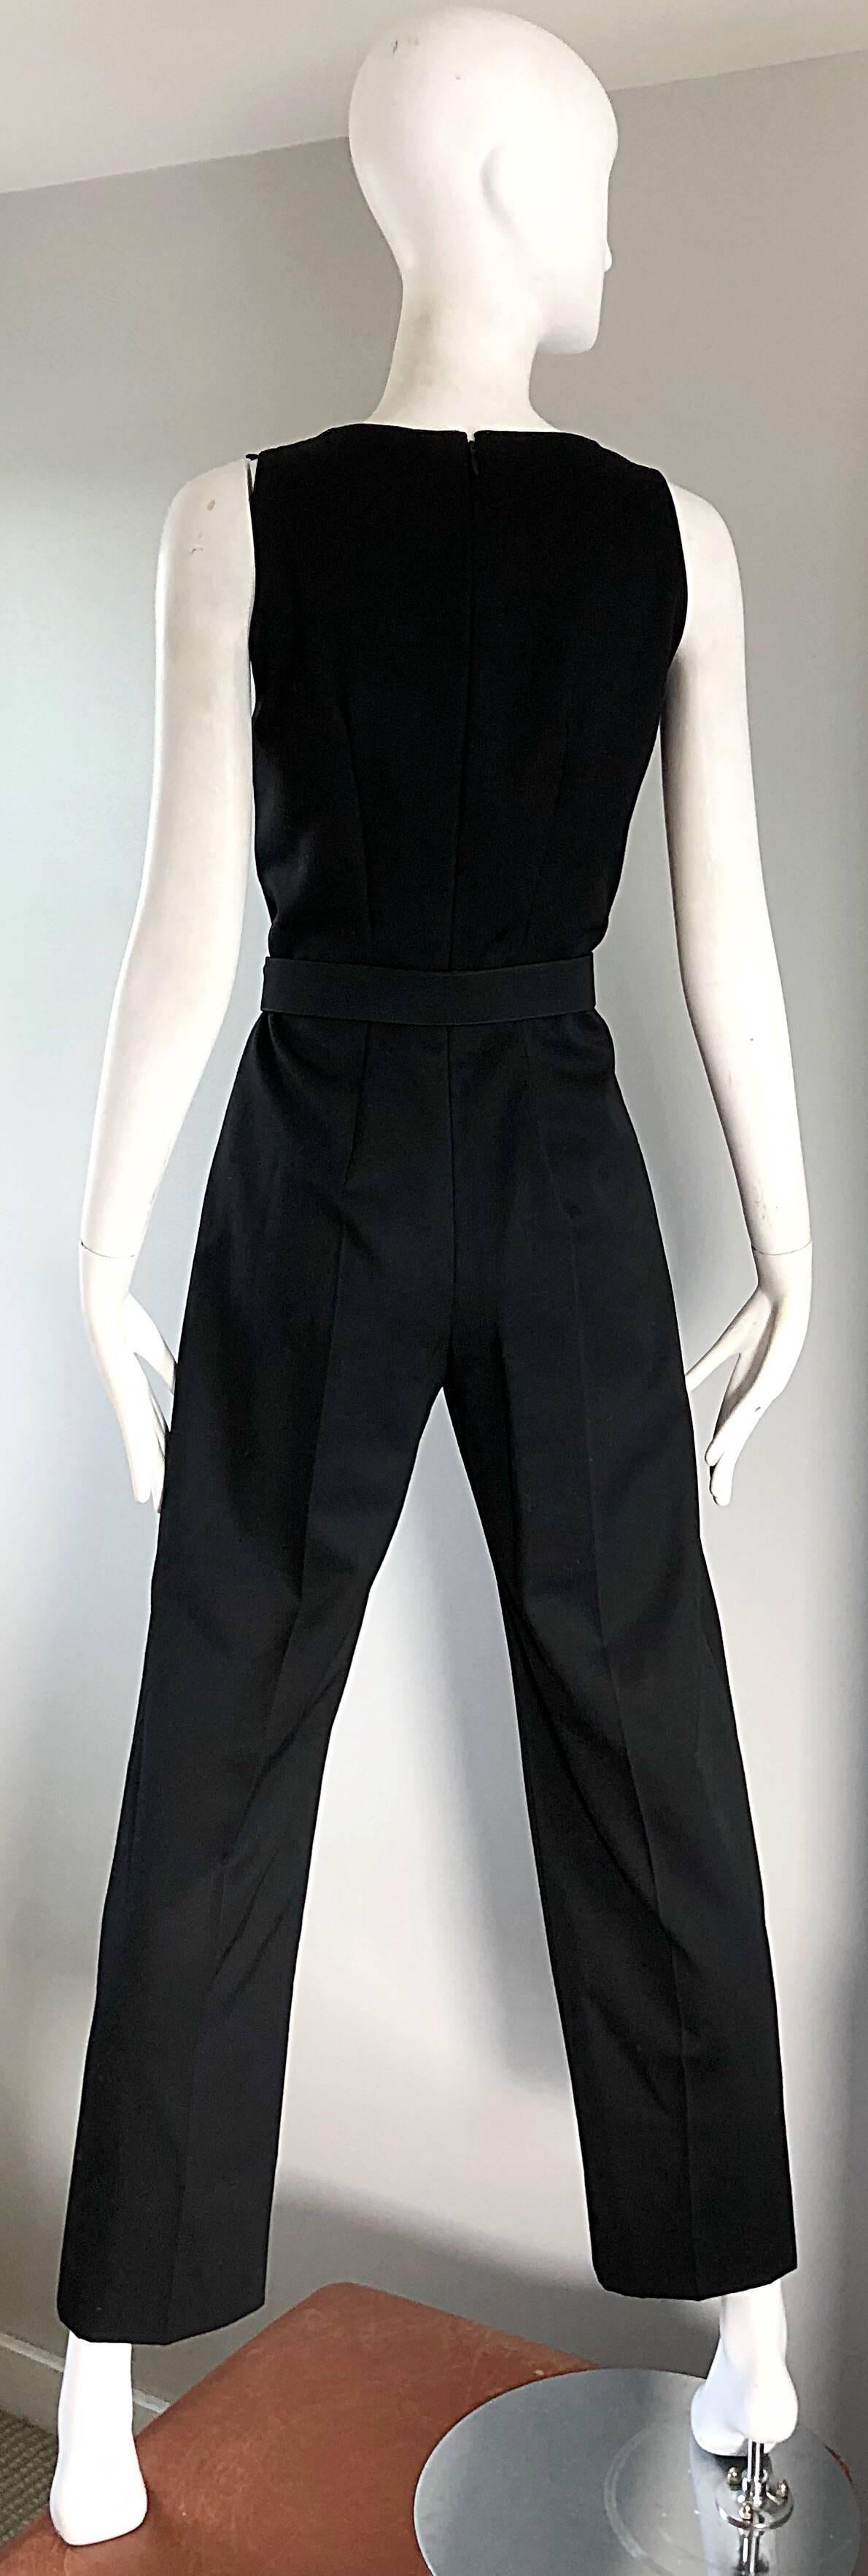 Alexander McQueen for Givenchy Couture Vintage Black Jumpsuit + Cropped Jacket  3